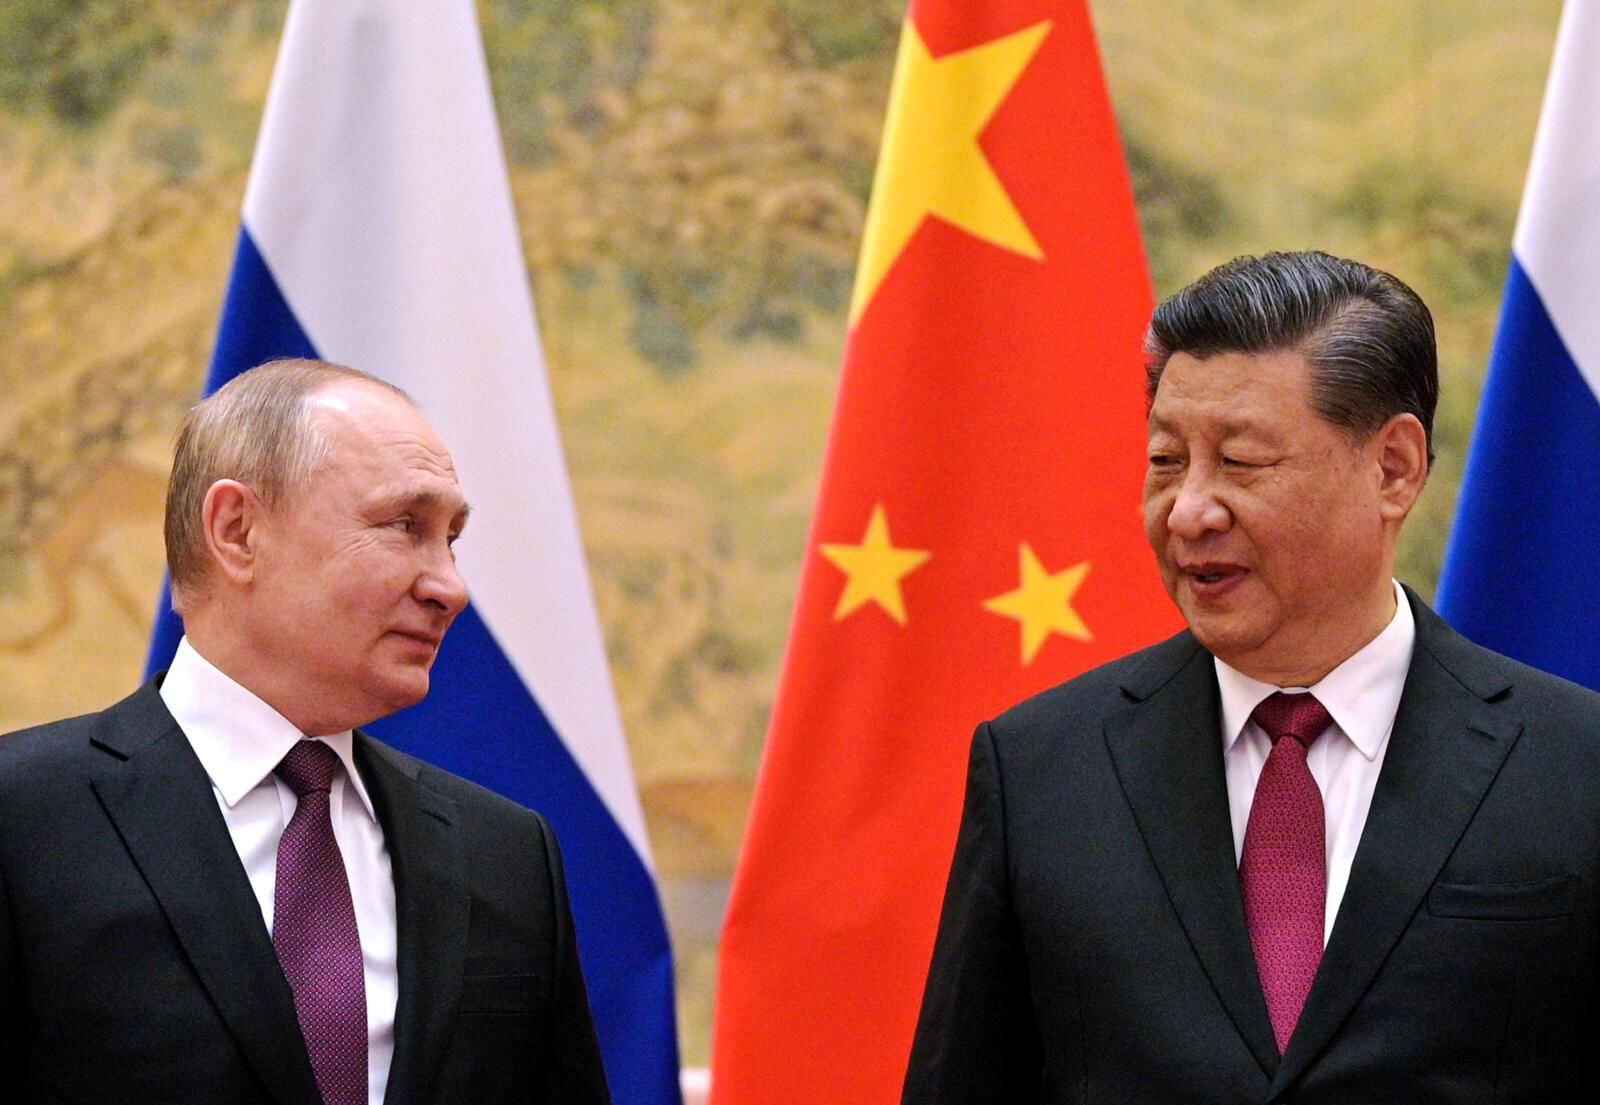 The last time Putin and Xi saw each other was on February 4, 2022 at the opening of the Beijing Winter Olympics. 